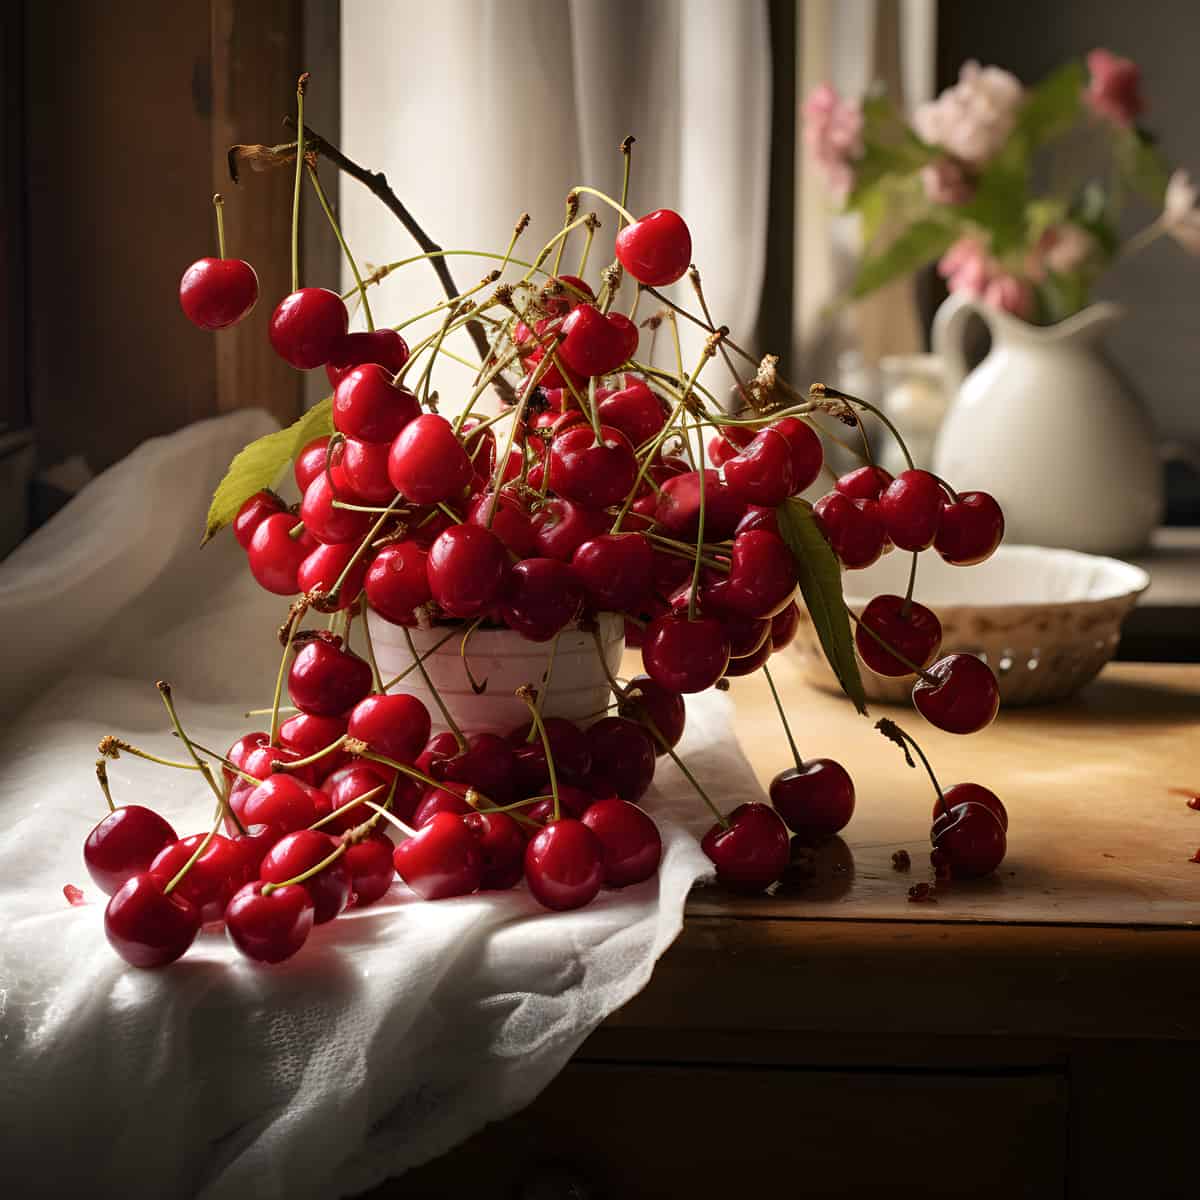 Brush Cherries on a kitchen counter